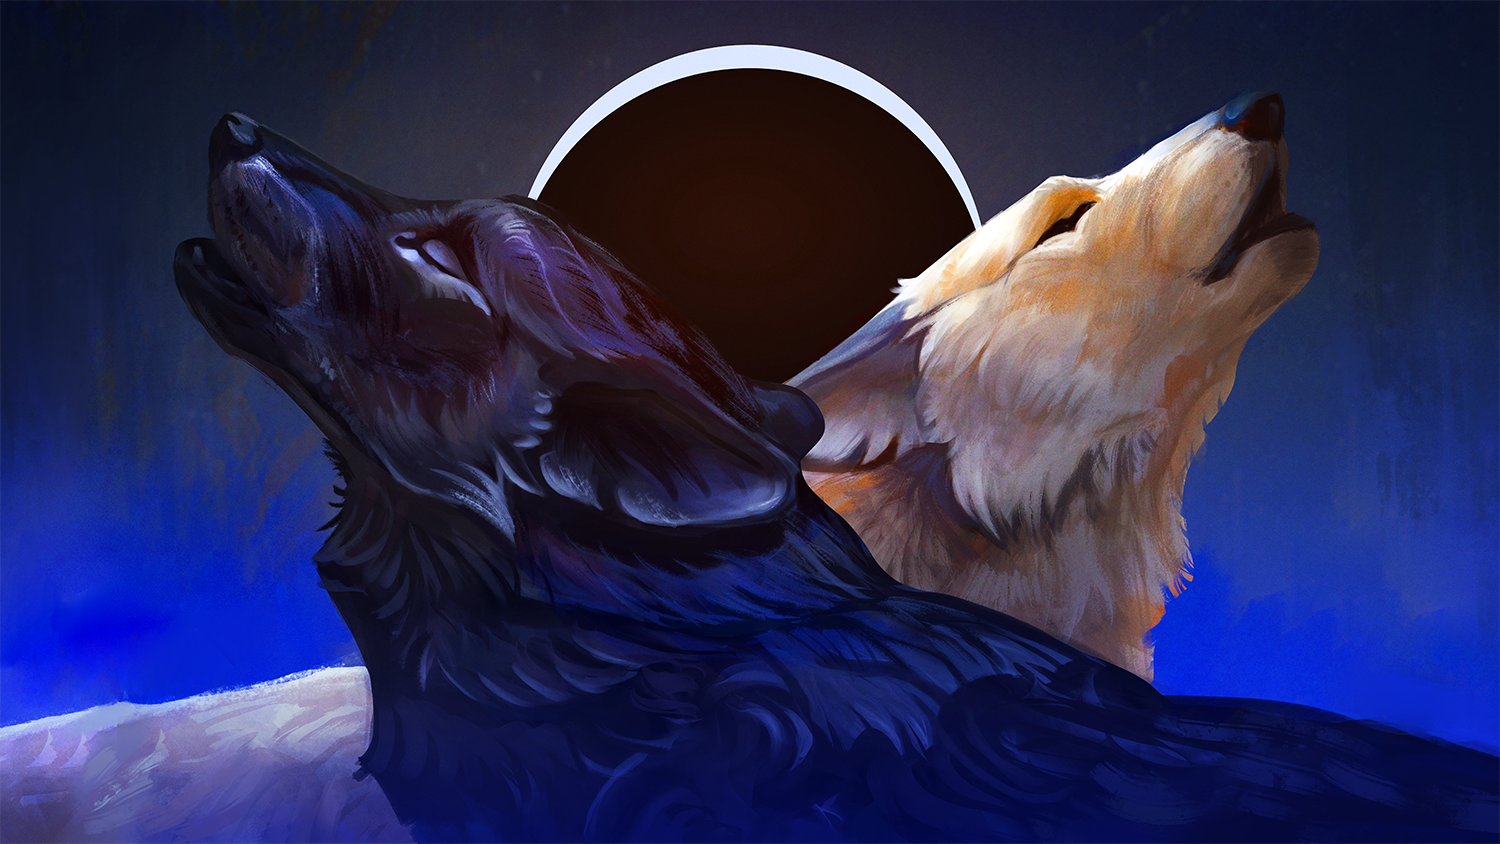 Two wolves in winter. One howls - desktop wallpapers